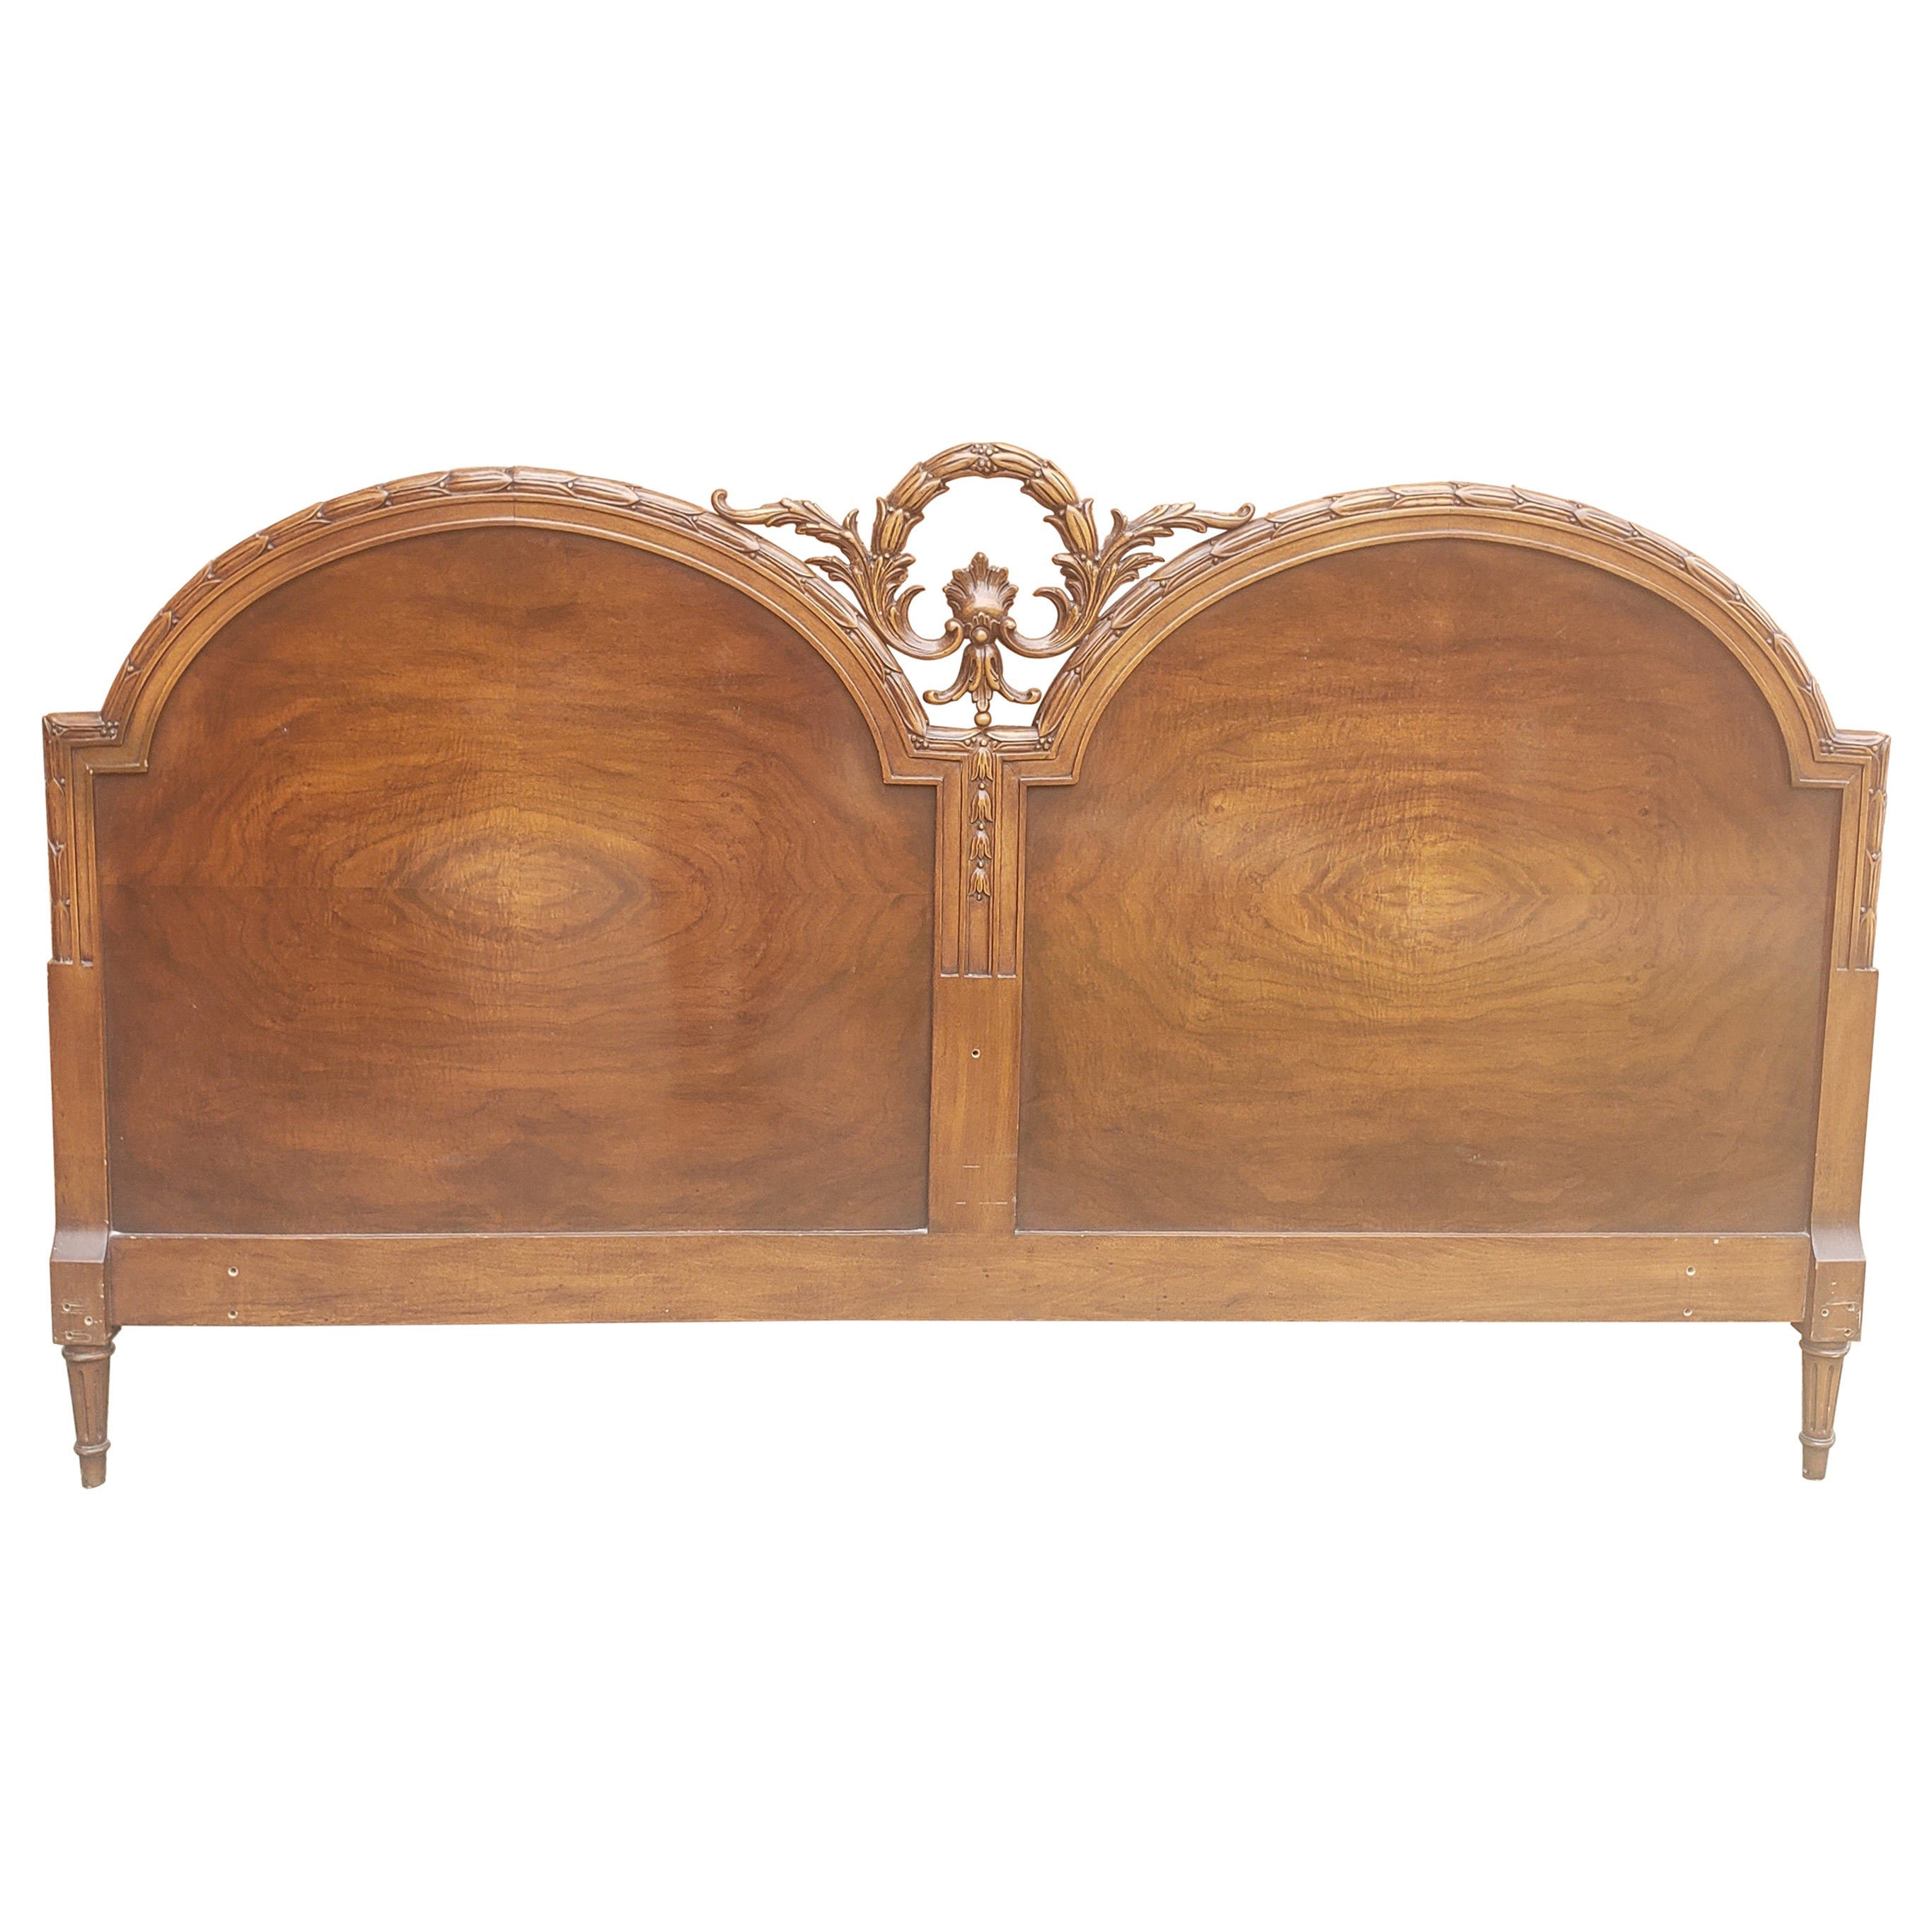 French Baroque Style Carved Mahogany King Size Headboard